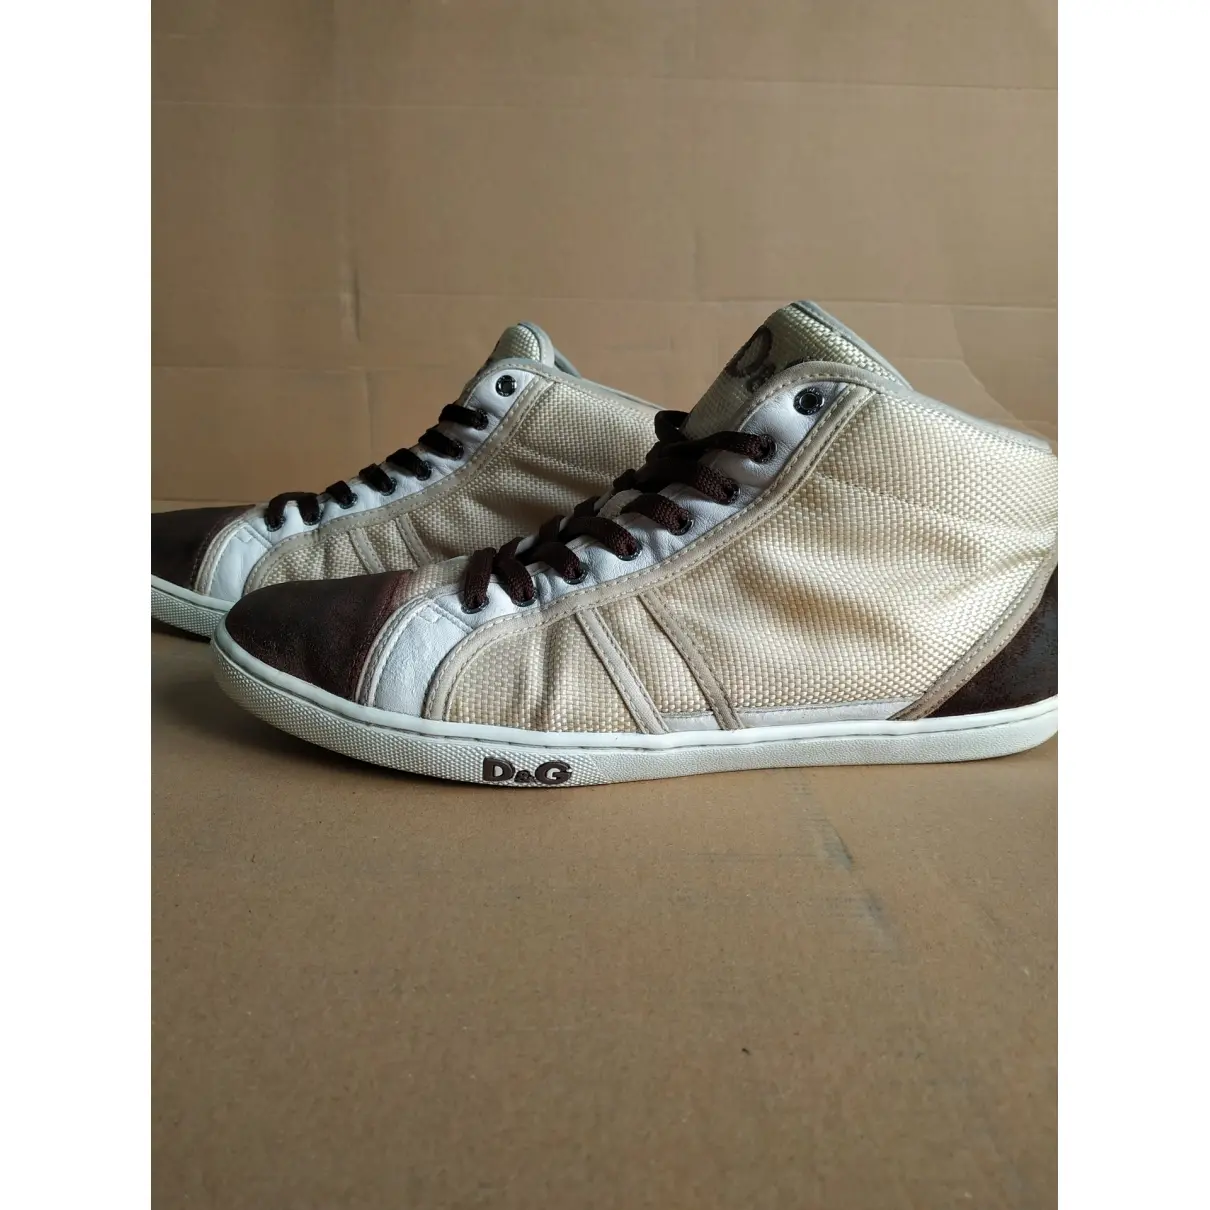 Buy D&G Cloth high trainers online